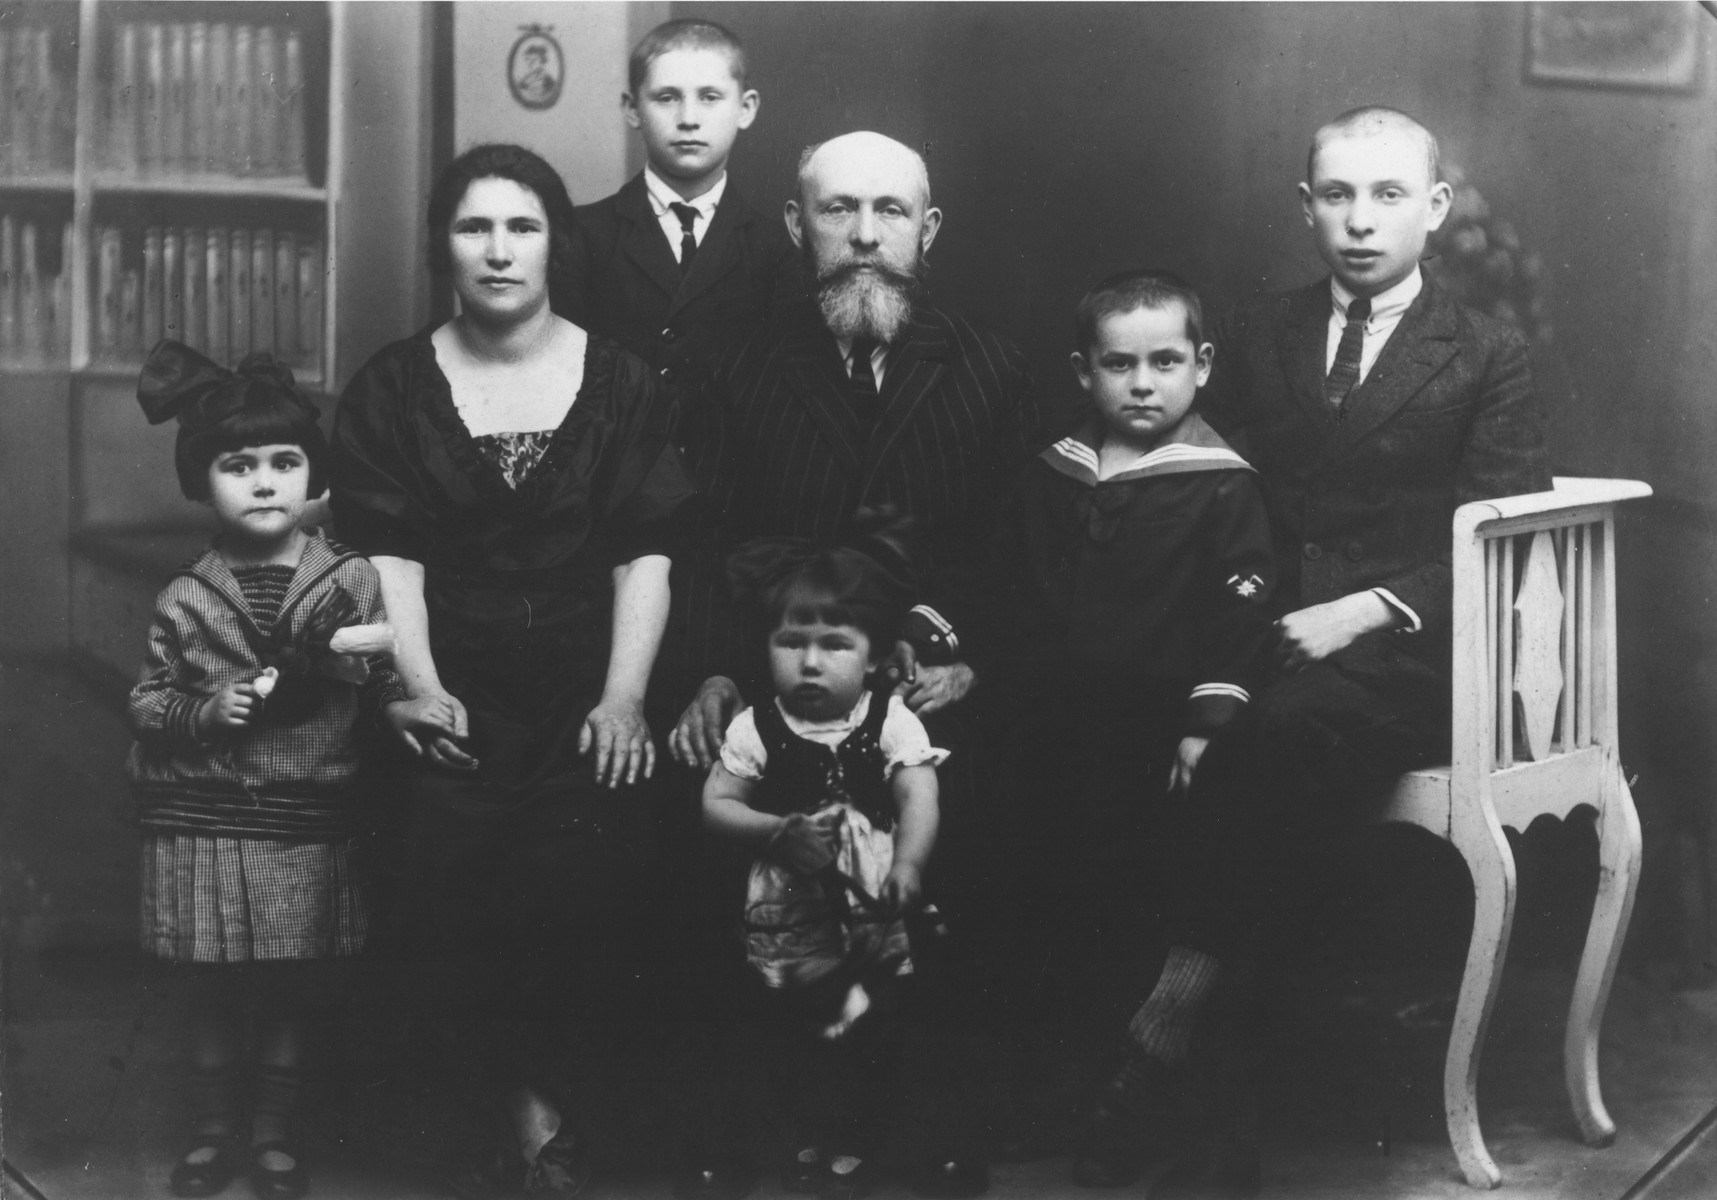 Studio portrait of a Jewish family in interior Poland.

Pictured are Yechial Yosef Szwimer, his wife Raiza 
Bella Godfried Szwimer and their children: sons Zvi, Yehuda, Yitzhak or Zerach, and daughters Tova and Rachel. Yechiel was born in Bedzin, Poland to Moshe Yechiel and [mother's name unknown]. Yechiel served  in the RAF in Ramat David in Israel, and died in 1967.


Pictured in the center are Aaronl Szwimer with some of their eleven children.